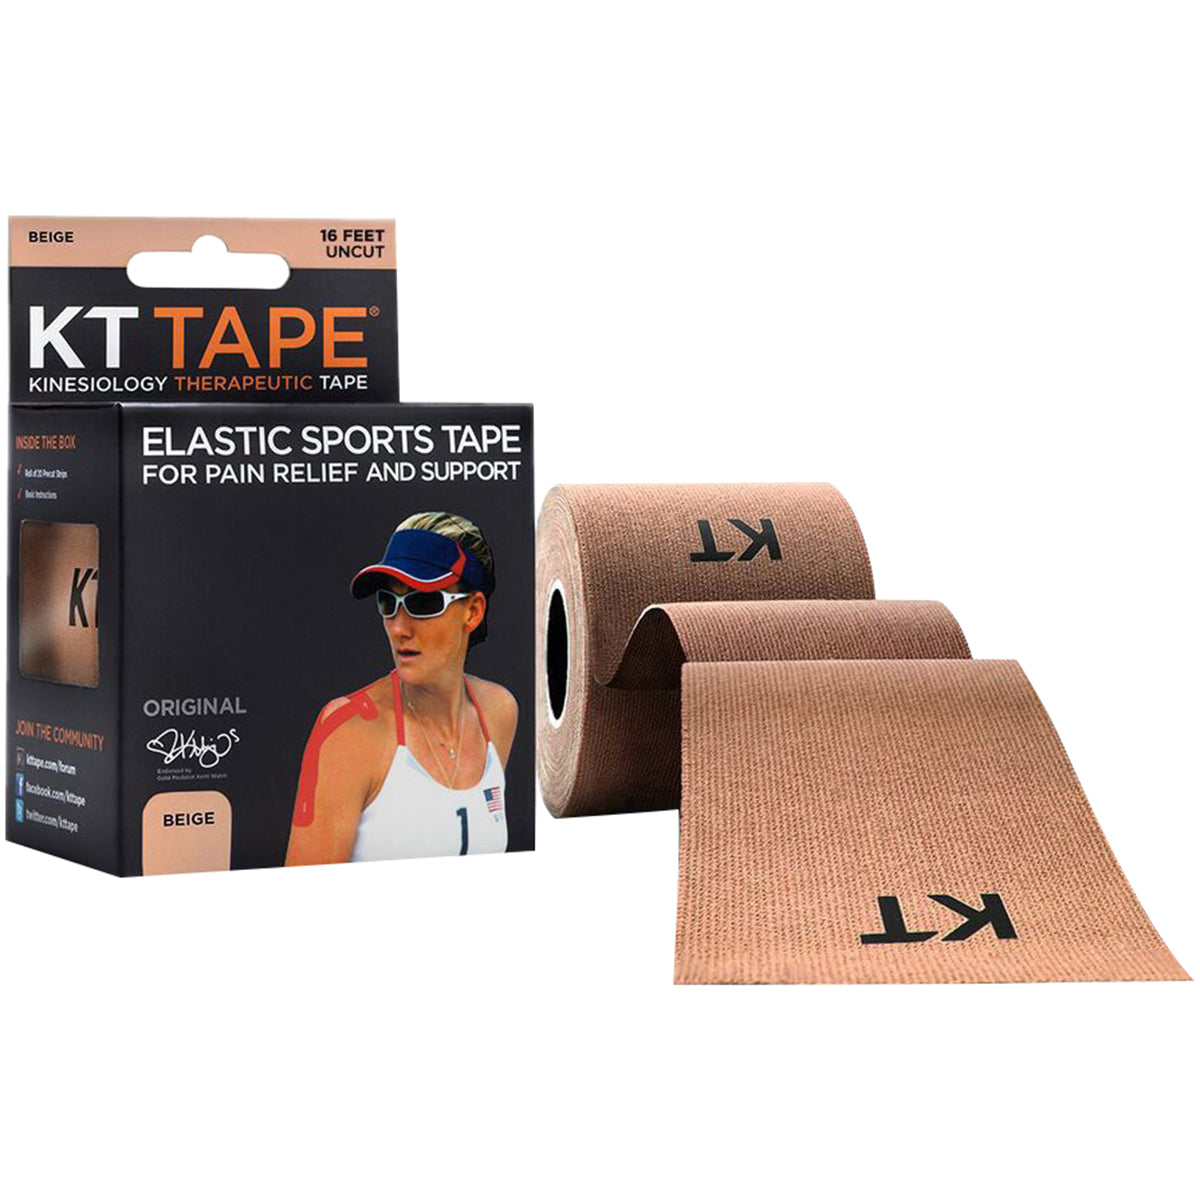 KT Tape Cotton 16 ft Uncut Kinesiology Therapeutic Elastic Sports Tape Roll KT Tape